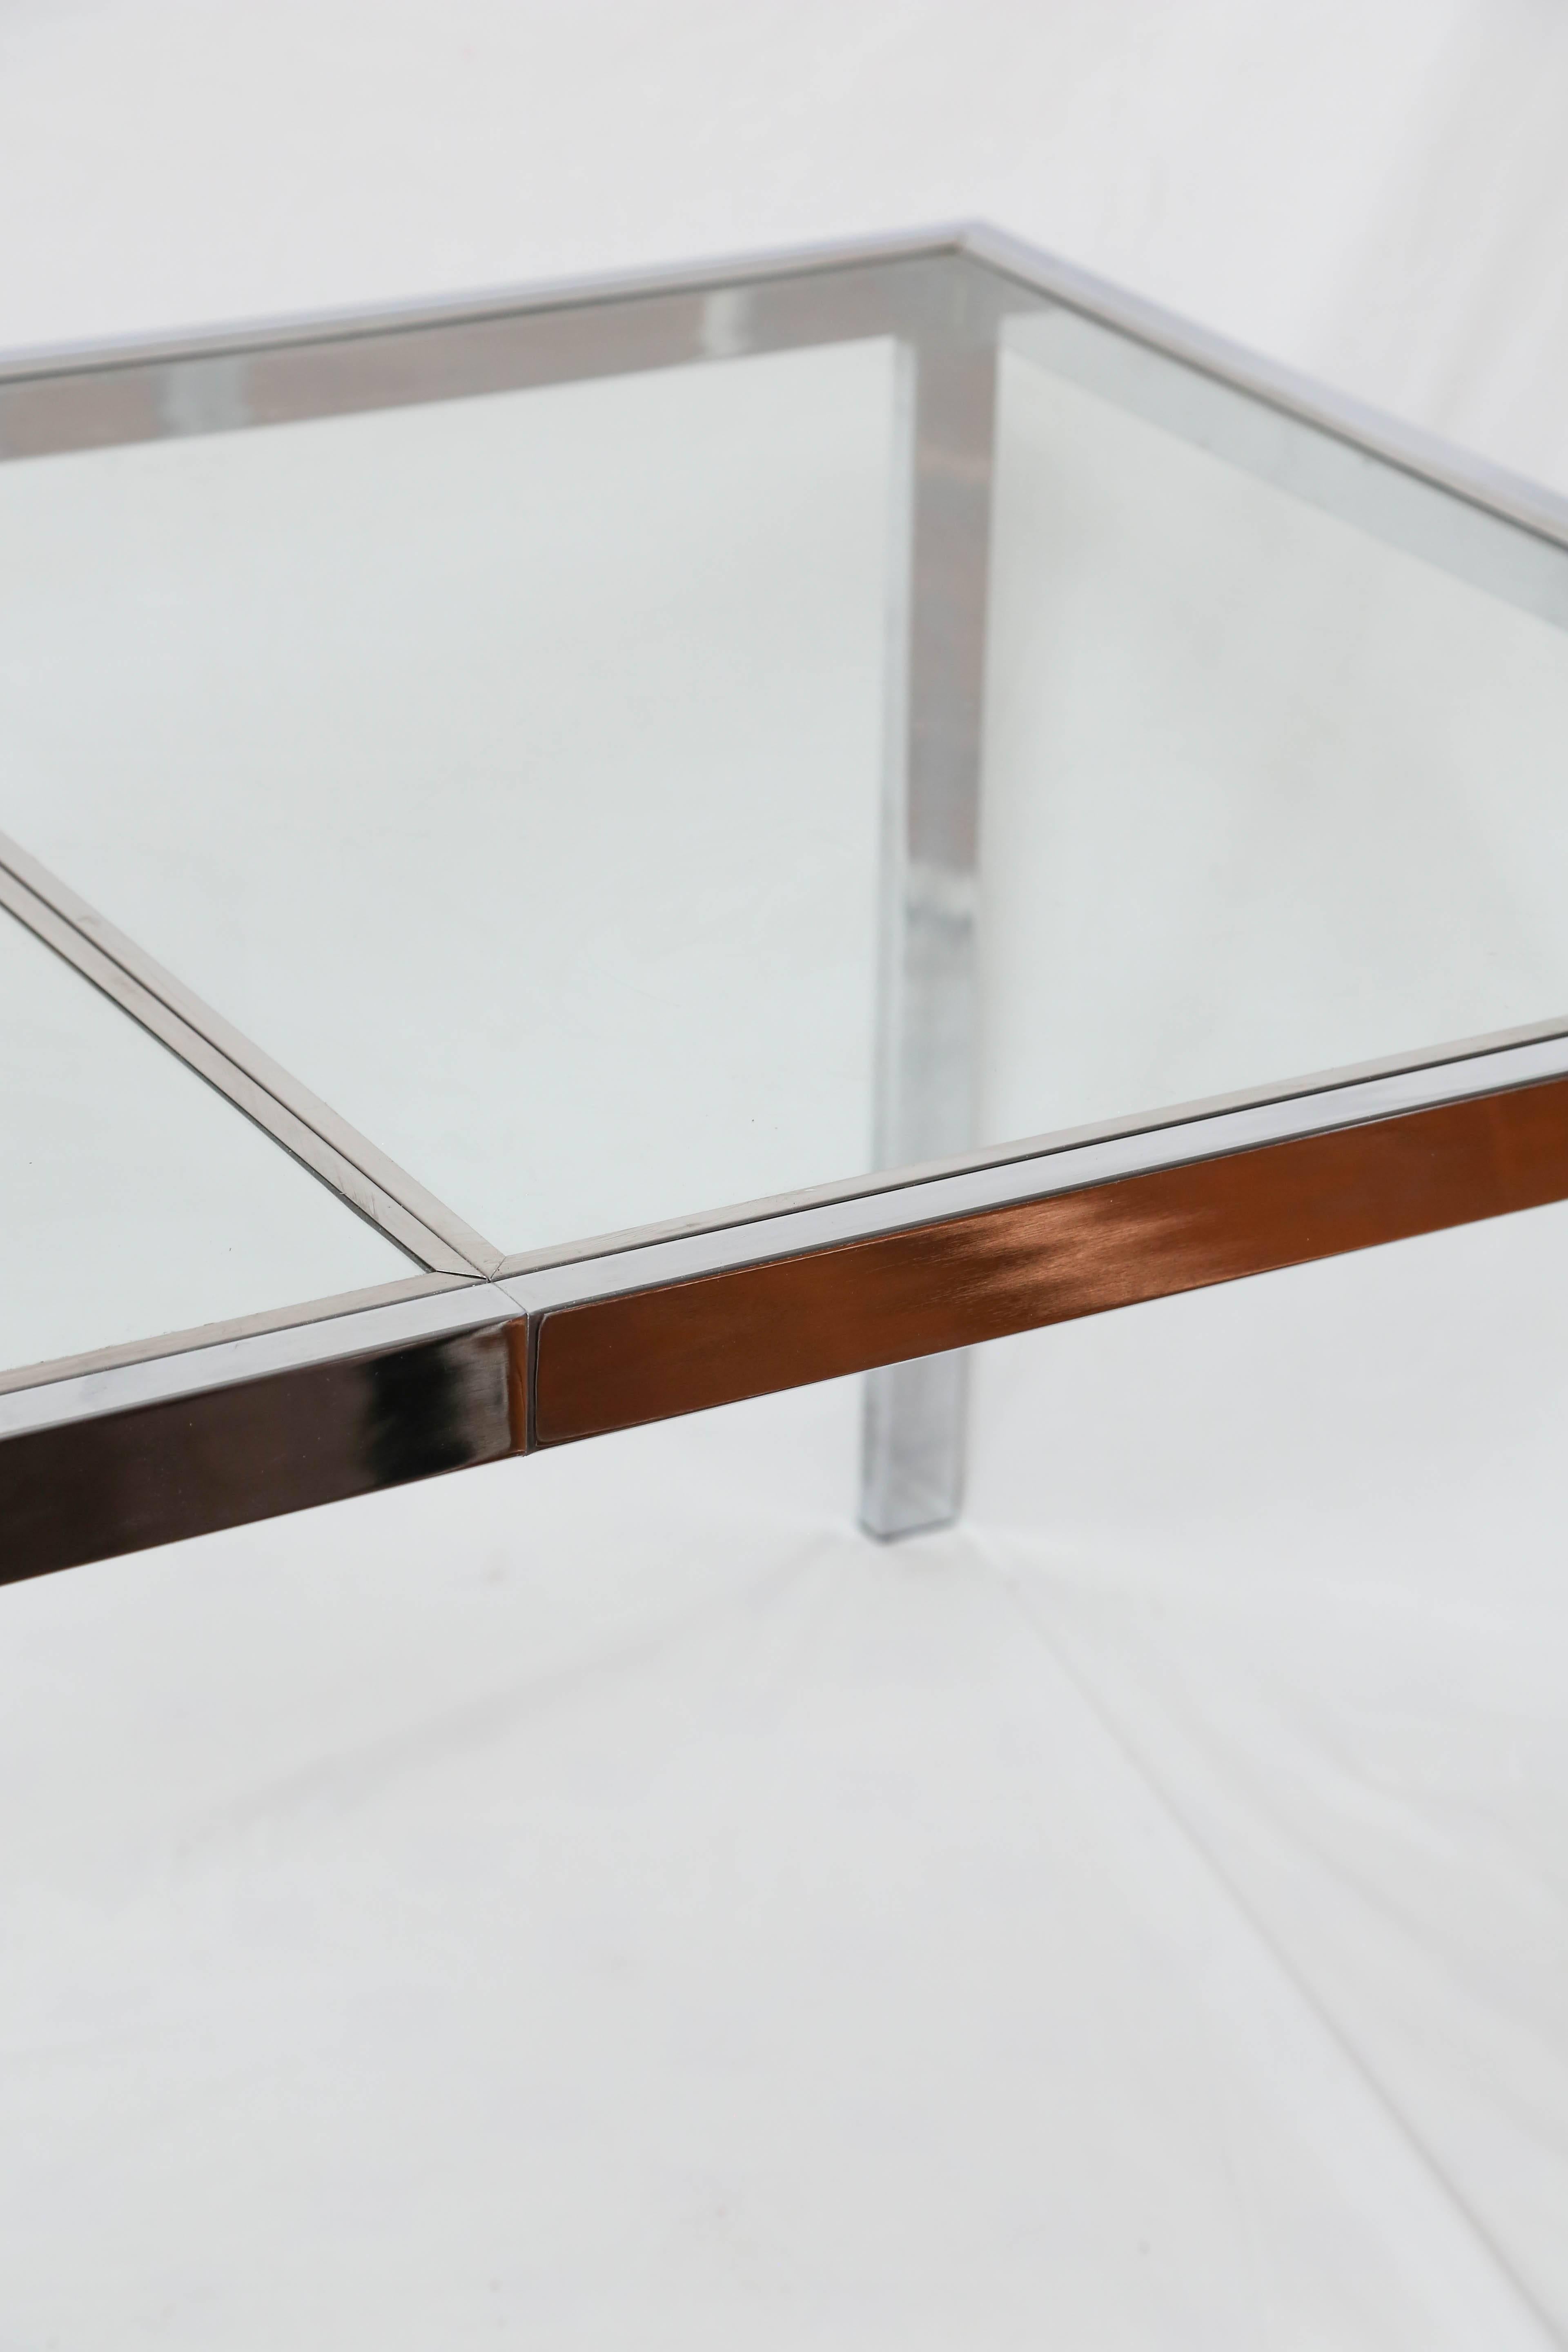 Expandable table in chrome by Milo Baughman

Measures: Leaf is 20